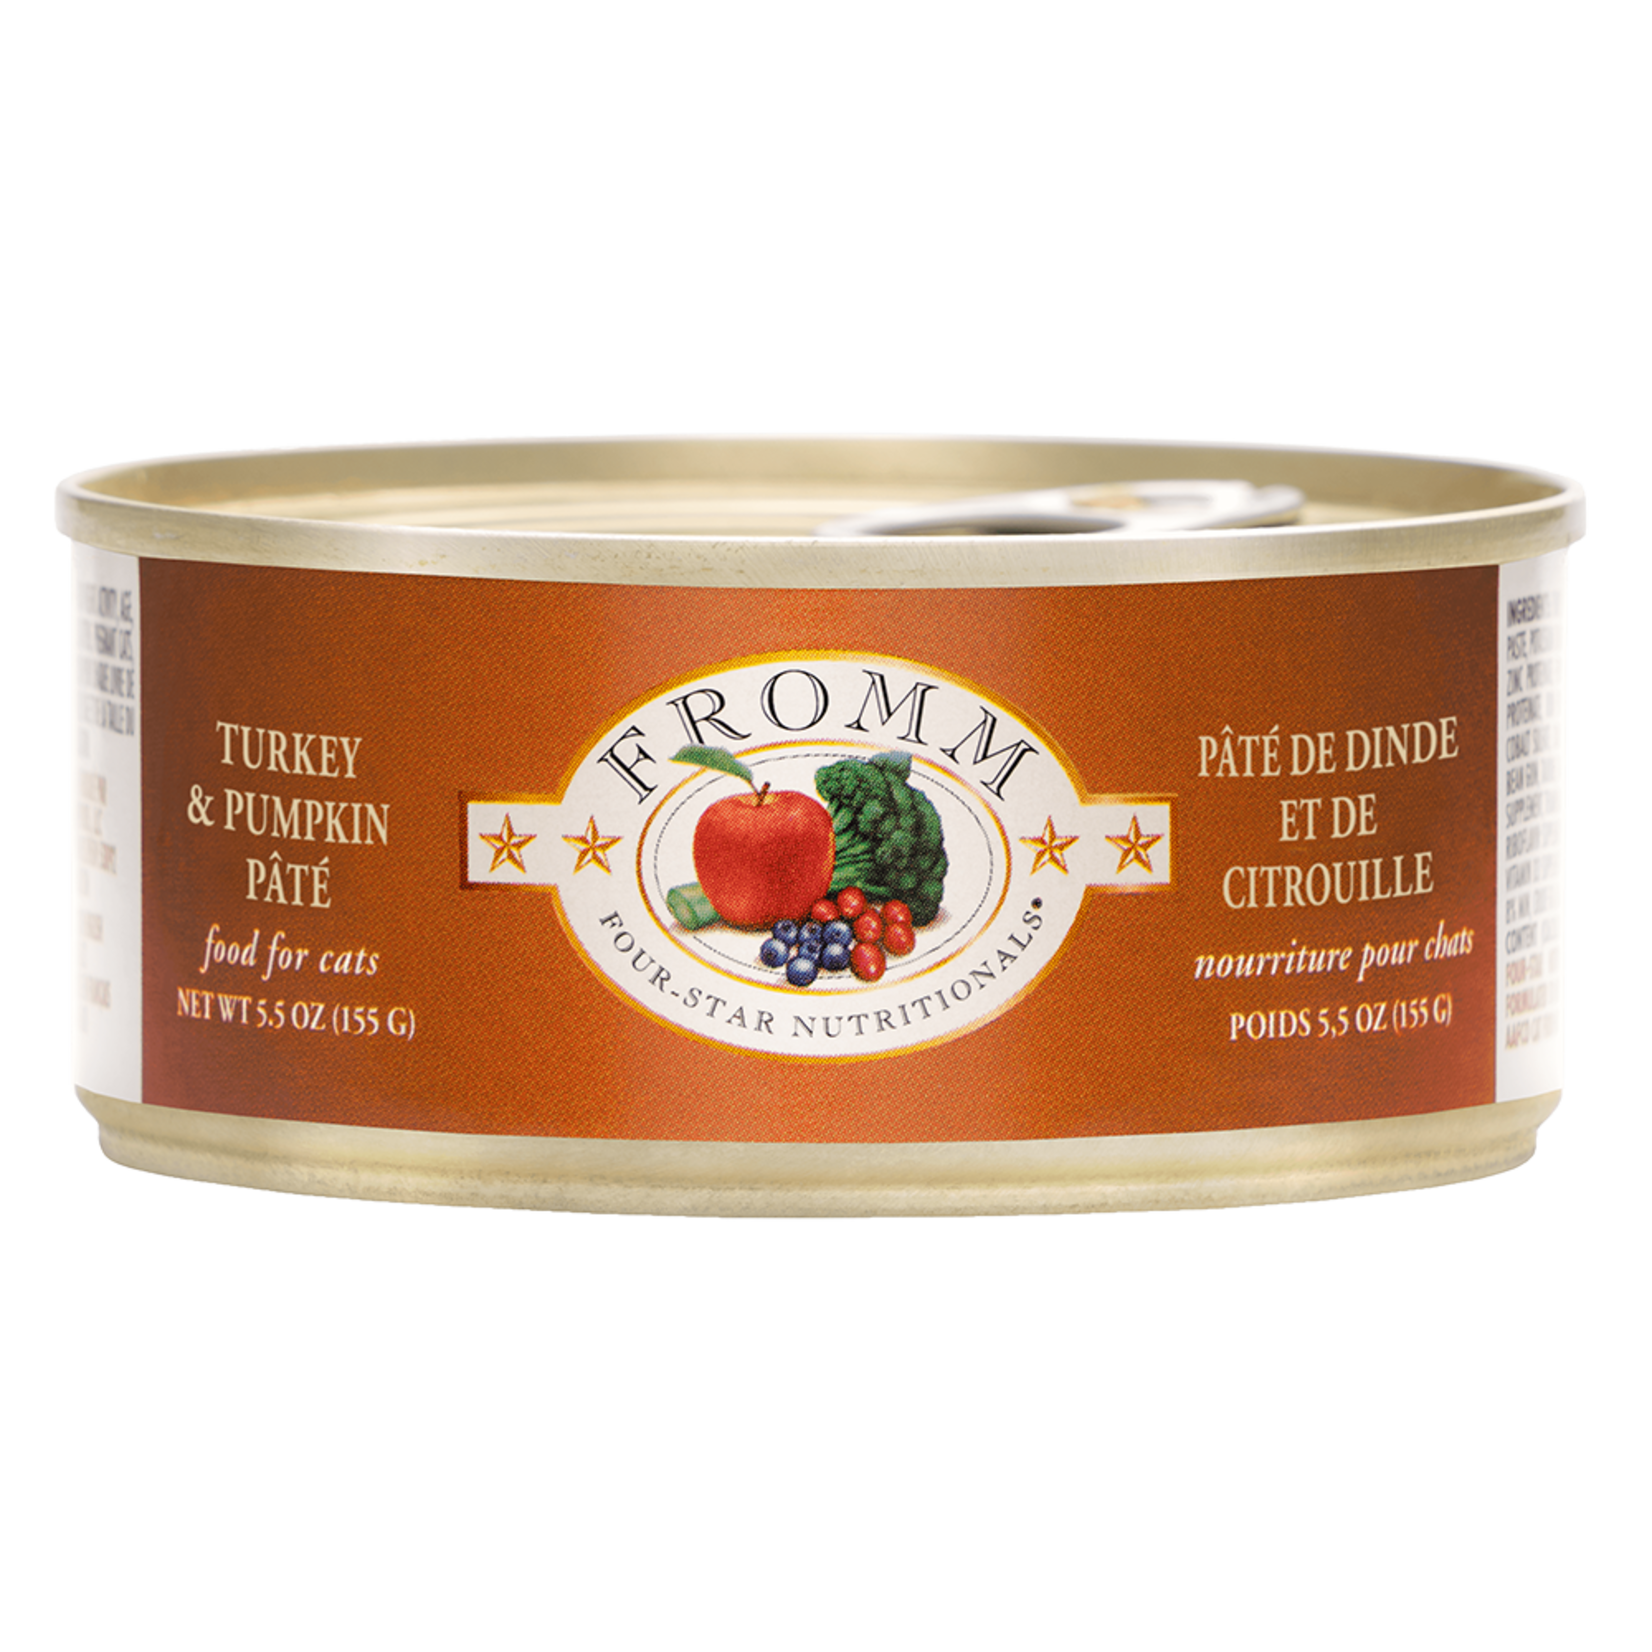 Fromm Family Fromm Turkey & Pumpkin Pate Canned Cat Food 5.5oz